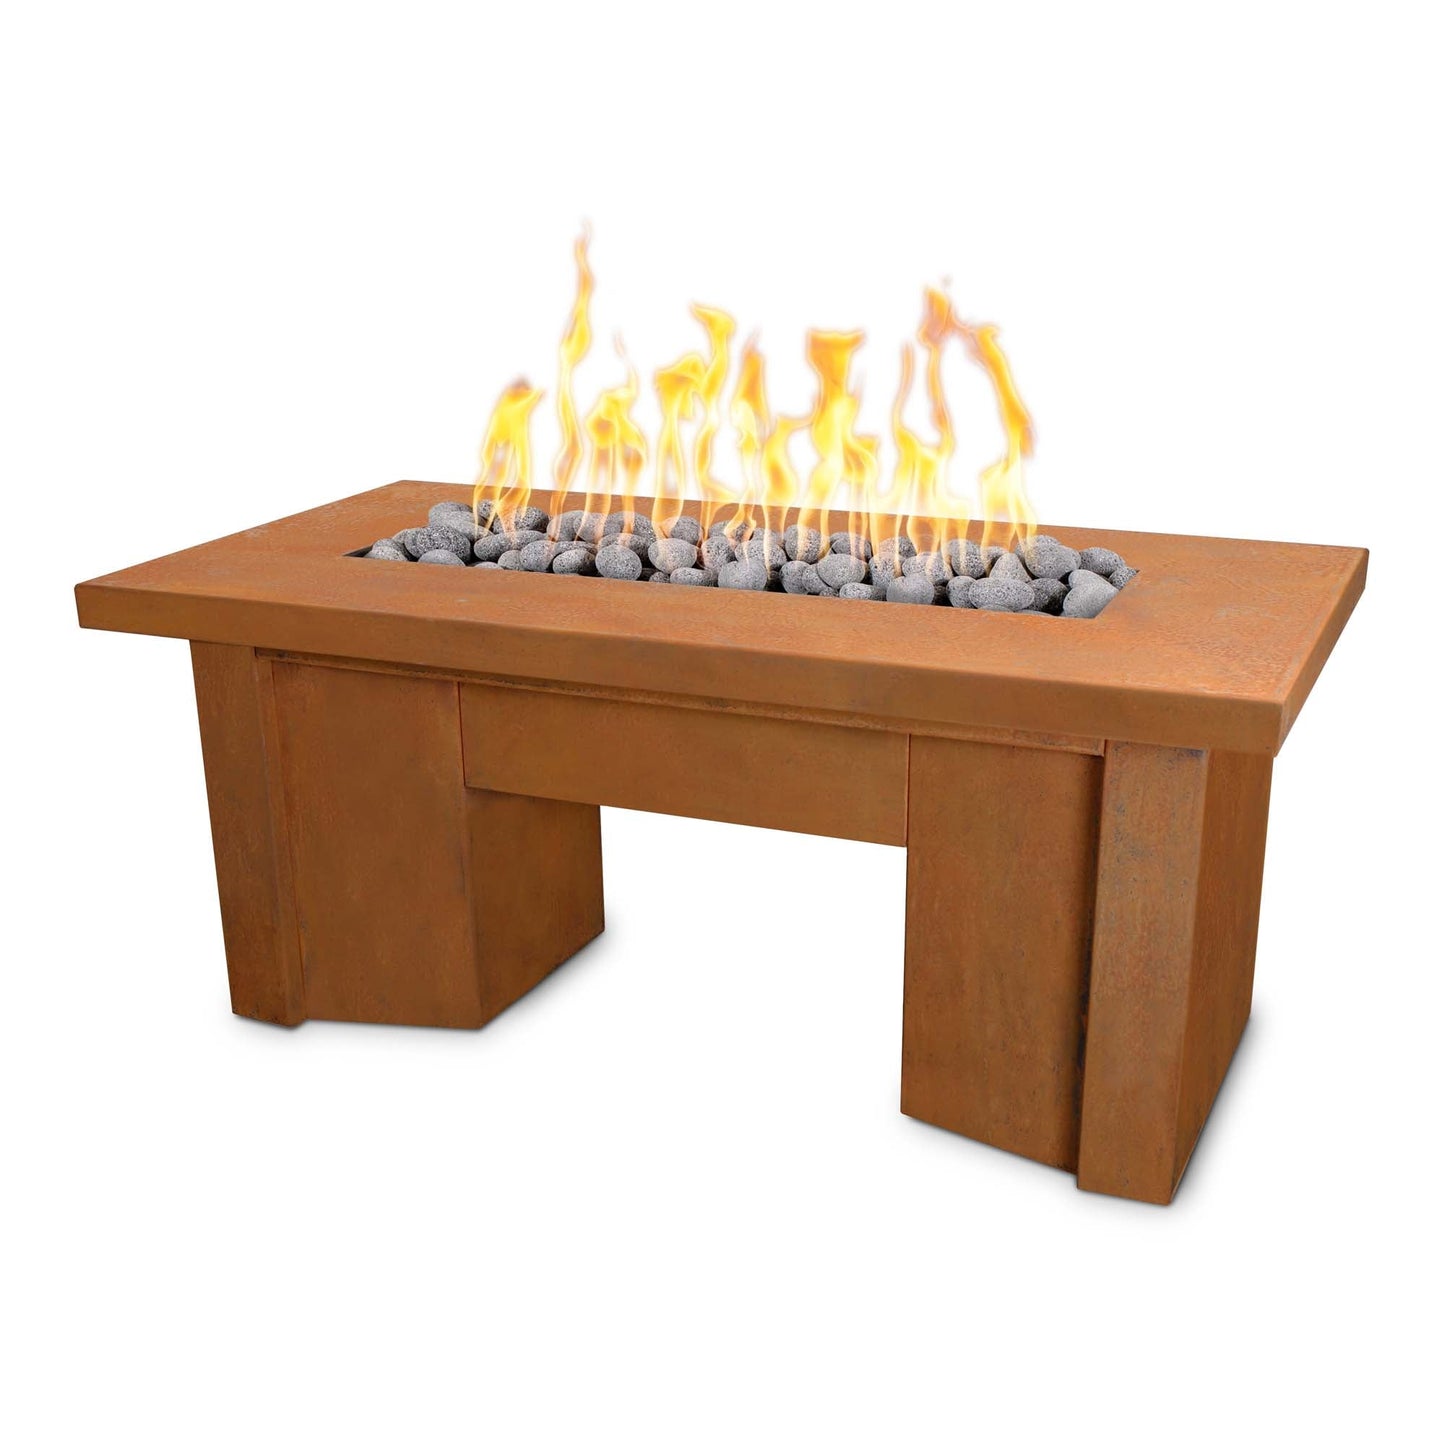 The Outdoor Plus Rectangular Alameda 78" Corten Steel Natural Gas Fire Pit with Match Lit Ignition